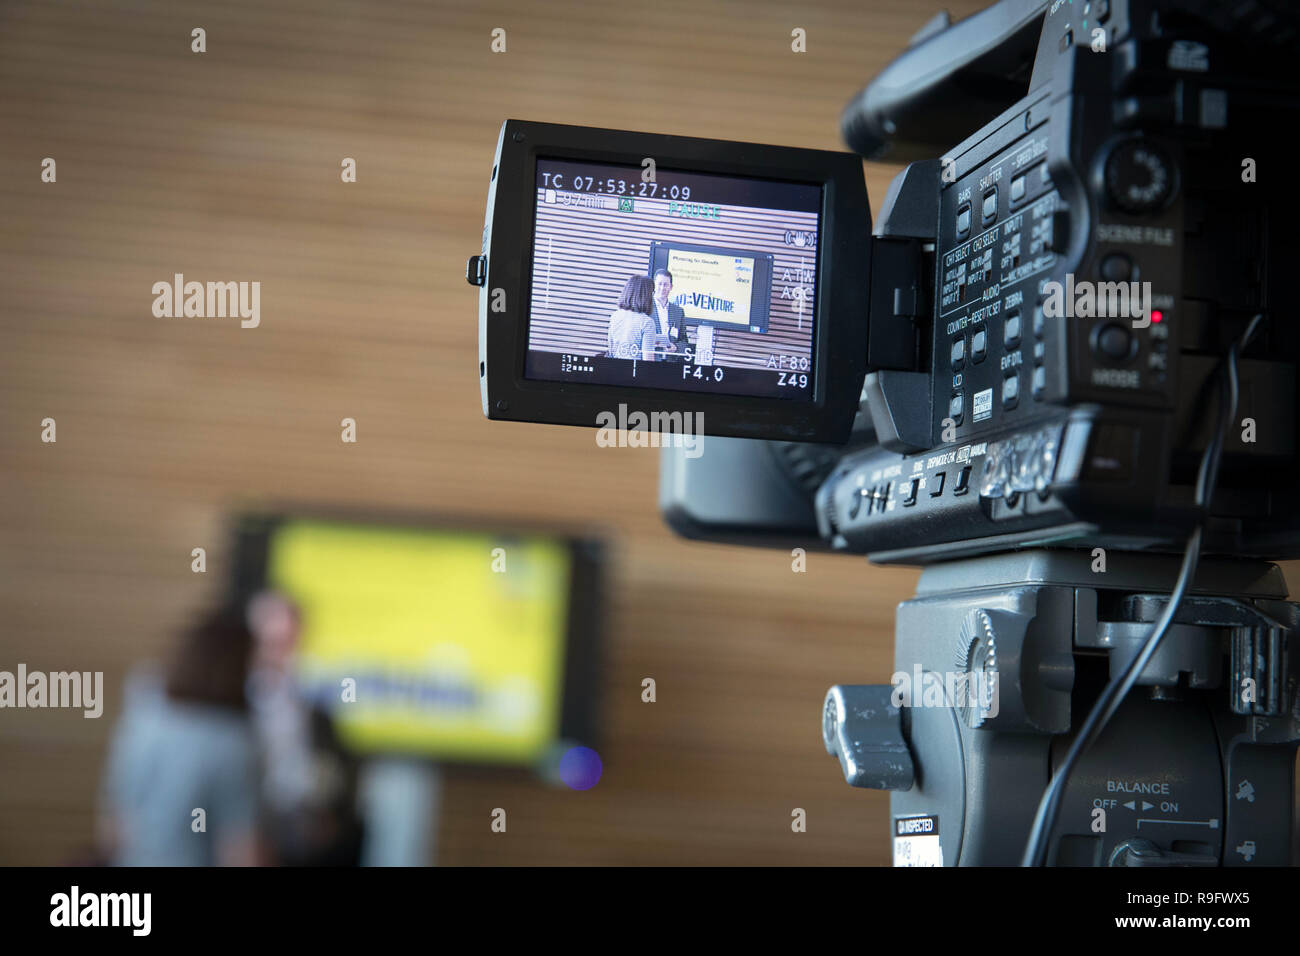 A video camera in use at a business conference Stock Photo